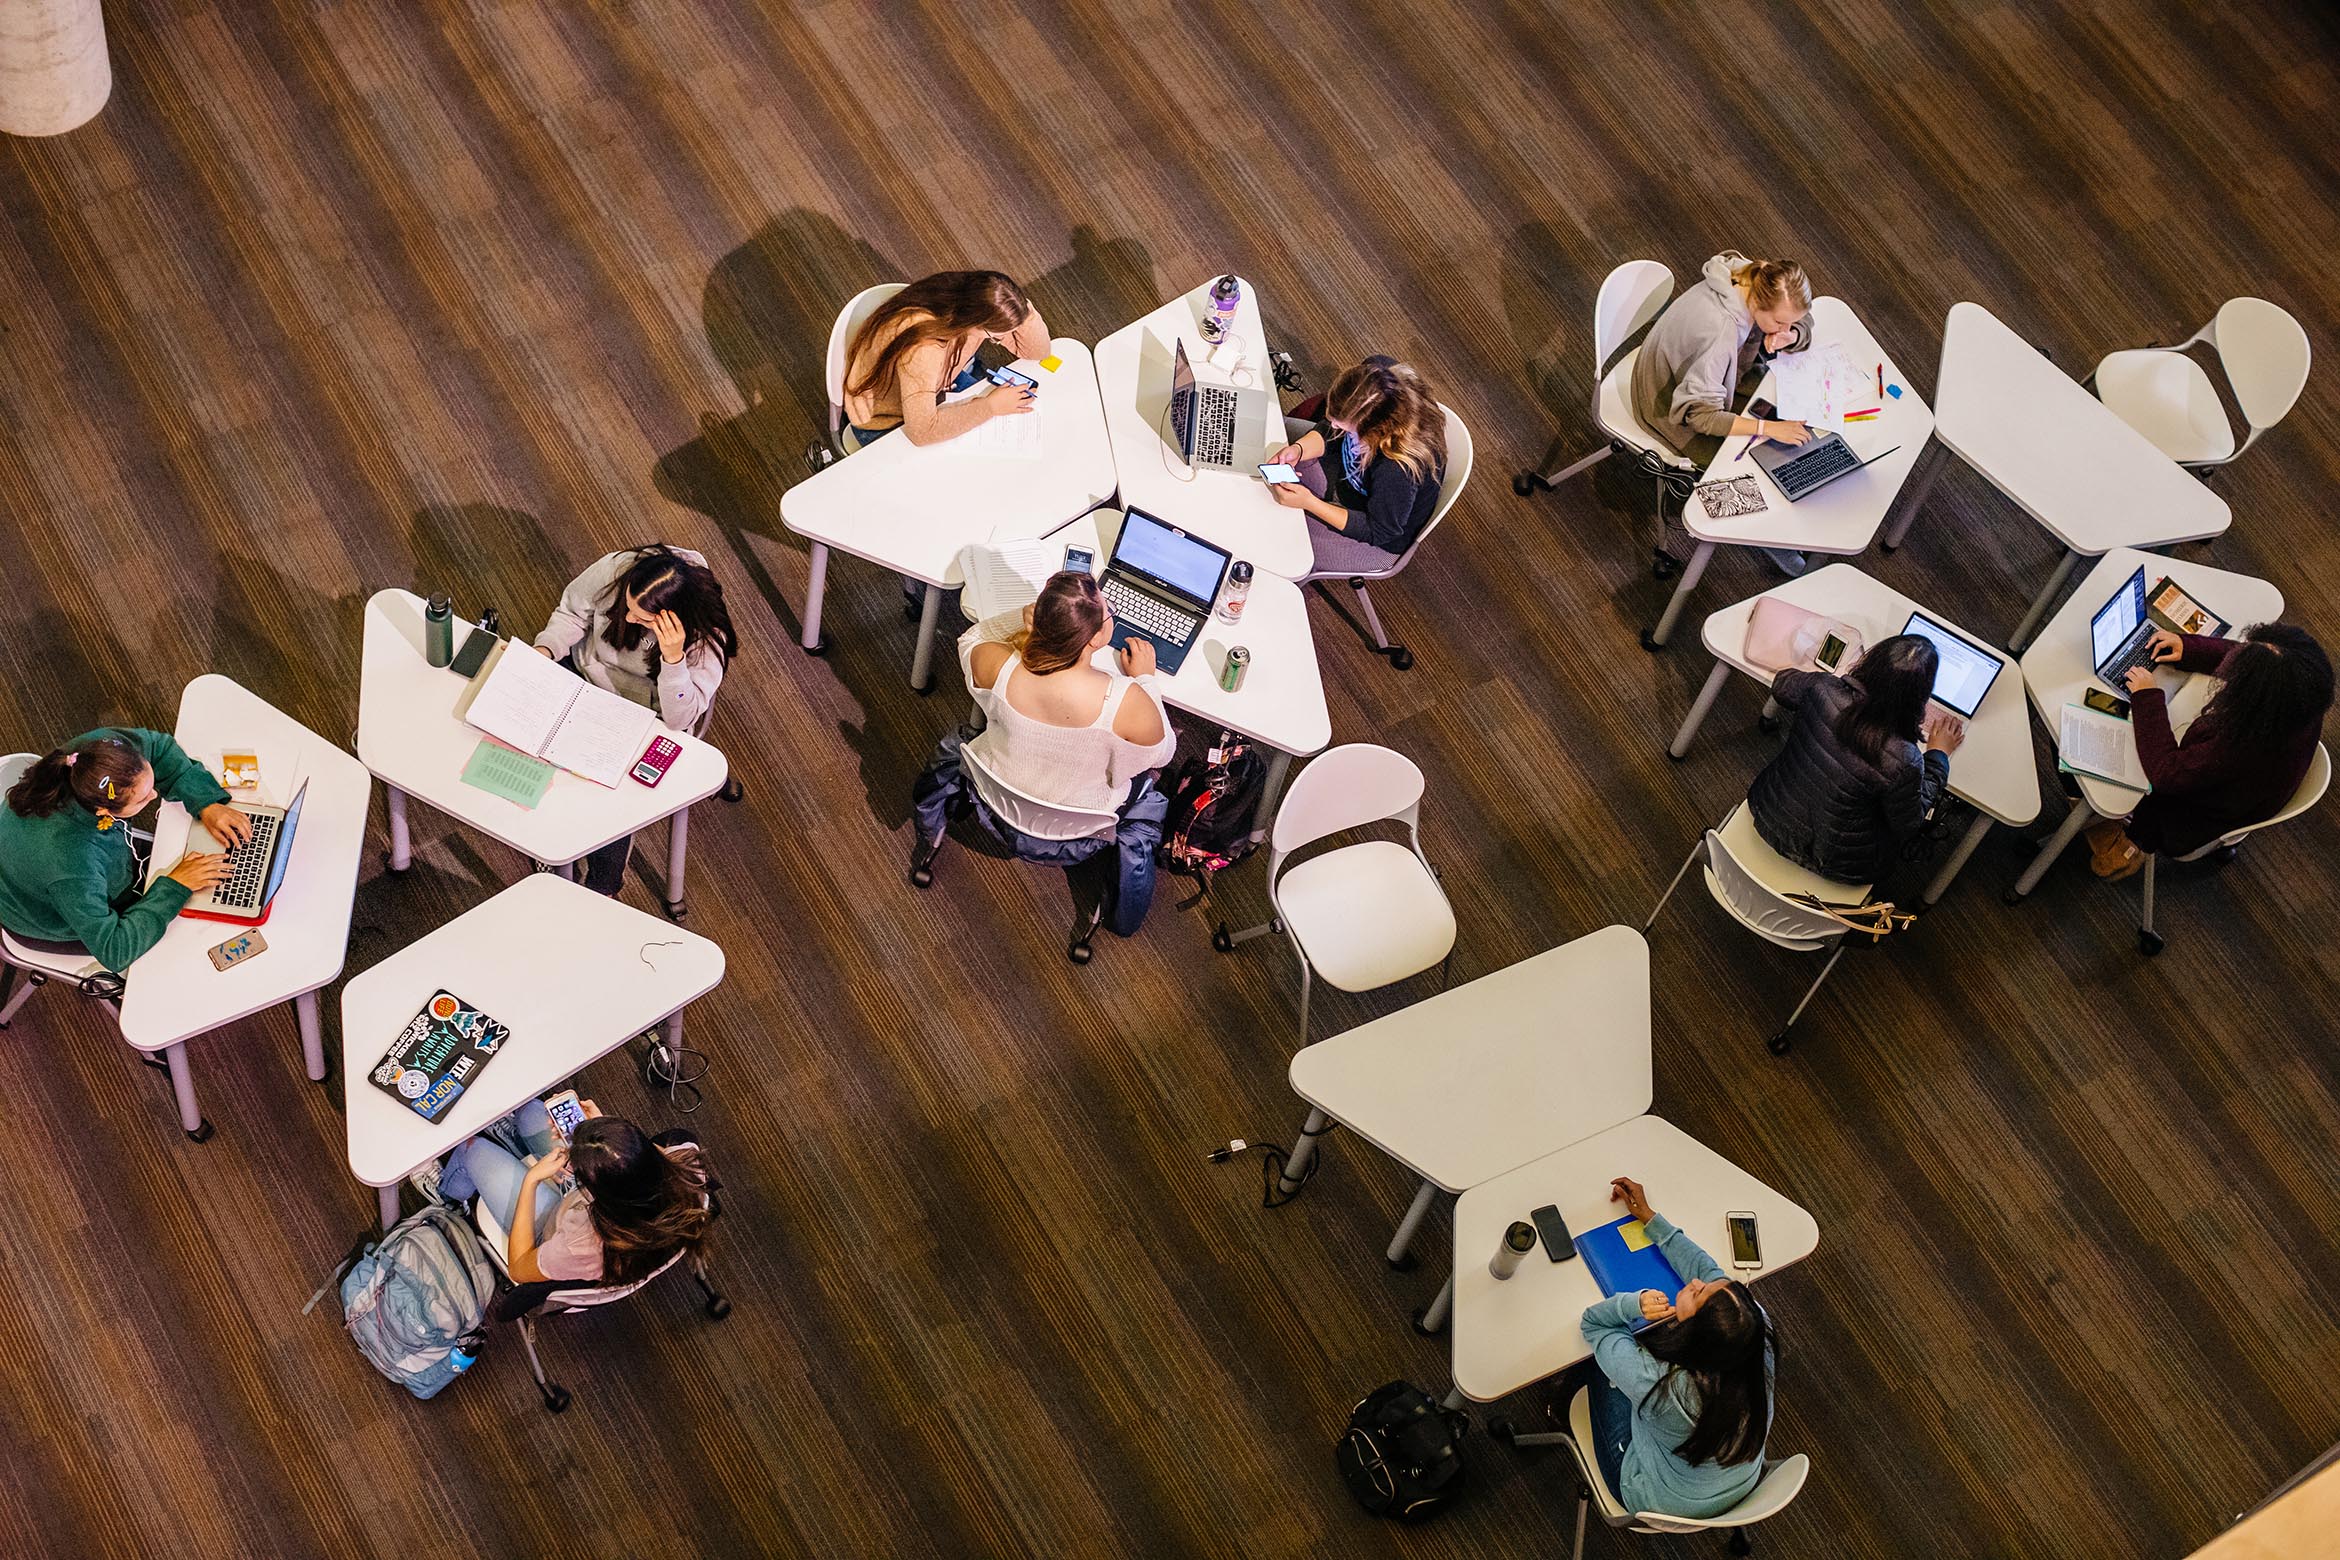 This is an image of students studying in the Student Resource Building from above.